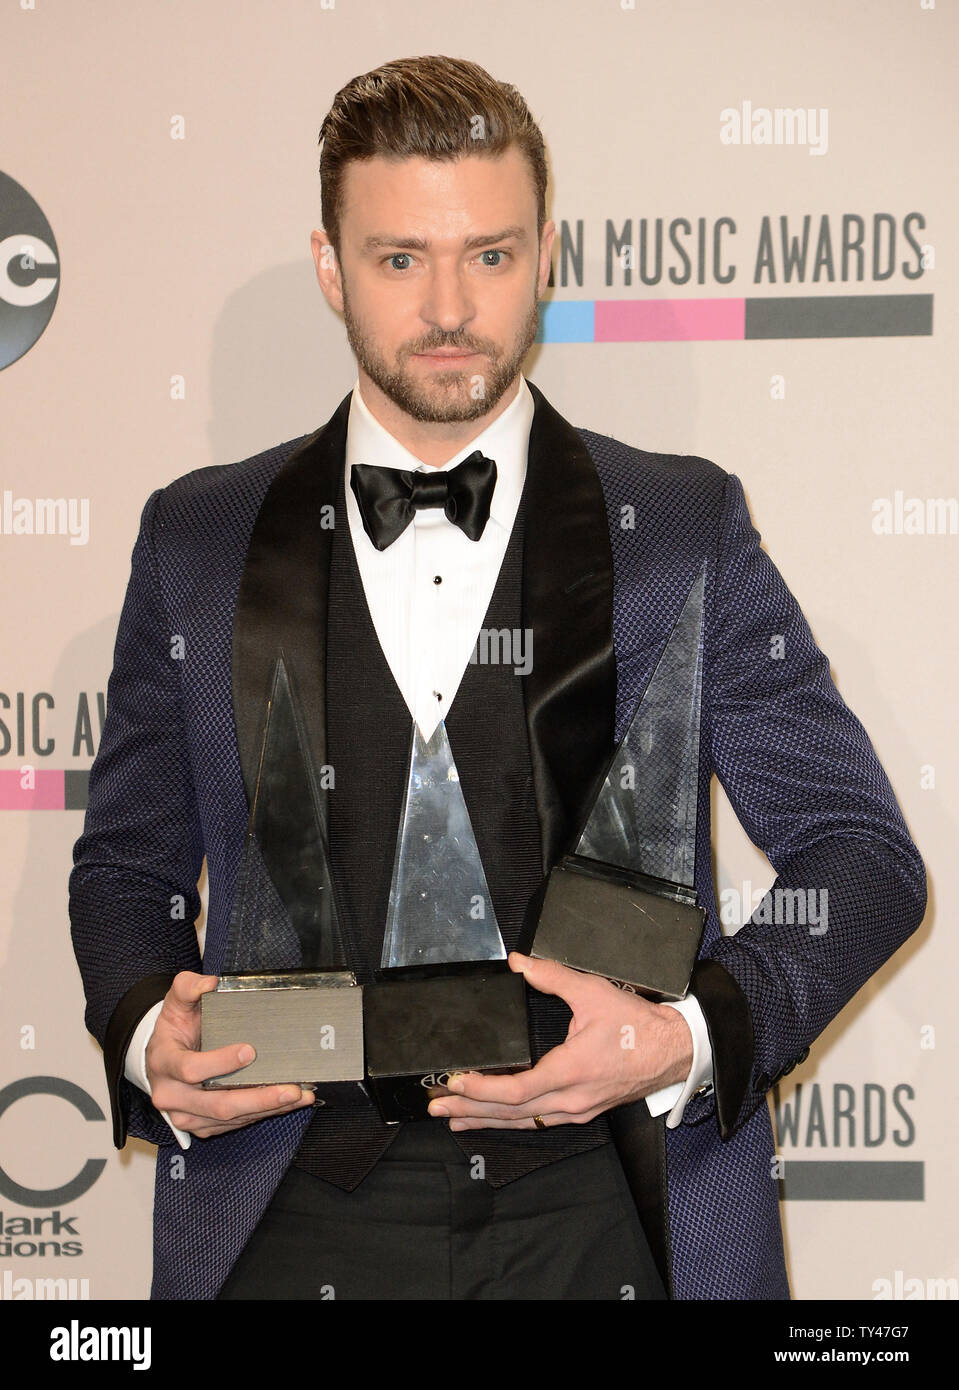 Recording artist Justin Timberlake holds the awards he won for Favorite Male Artist - Pop/Rock, Favorite Male Artist - Soul/R&B, and Favorite Album - Soul/R&B for 'The 20/20 Experience', backstage at the 41st annual American Music Awards held at Nokia Theatre L.A. Live in Los Angeles on November 24, 2013.  UPI/Phil McCarten Stock Photo